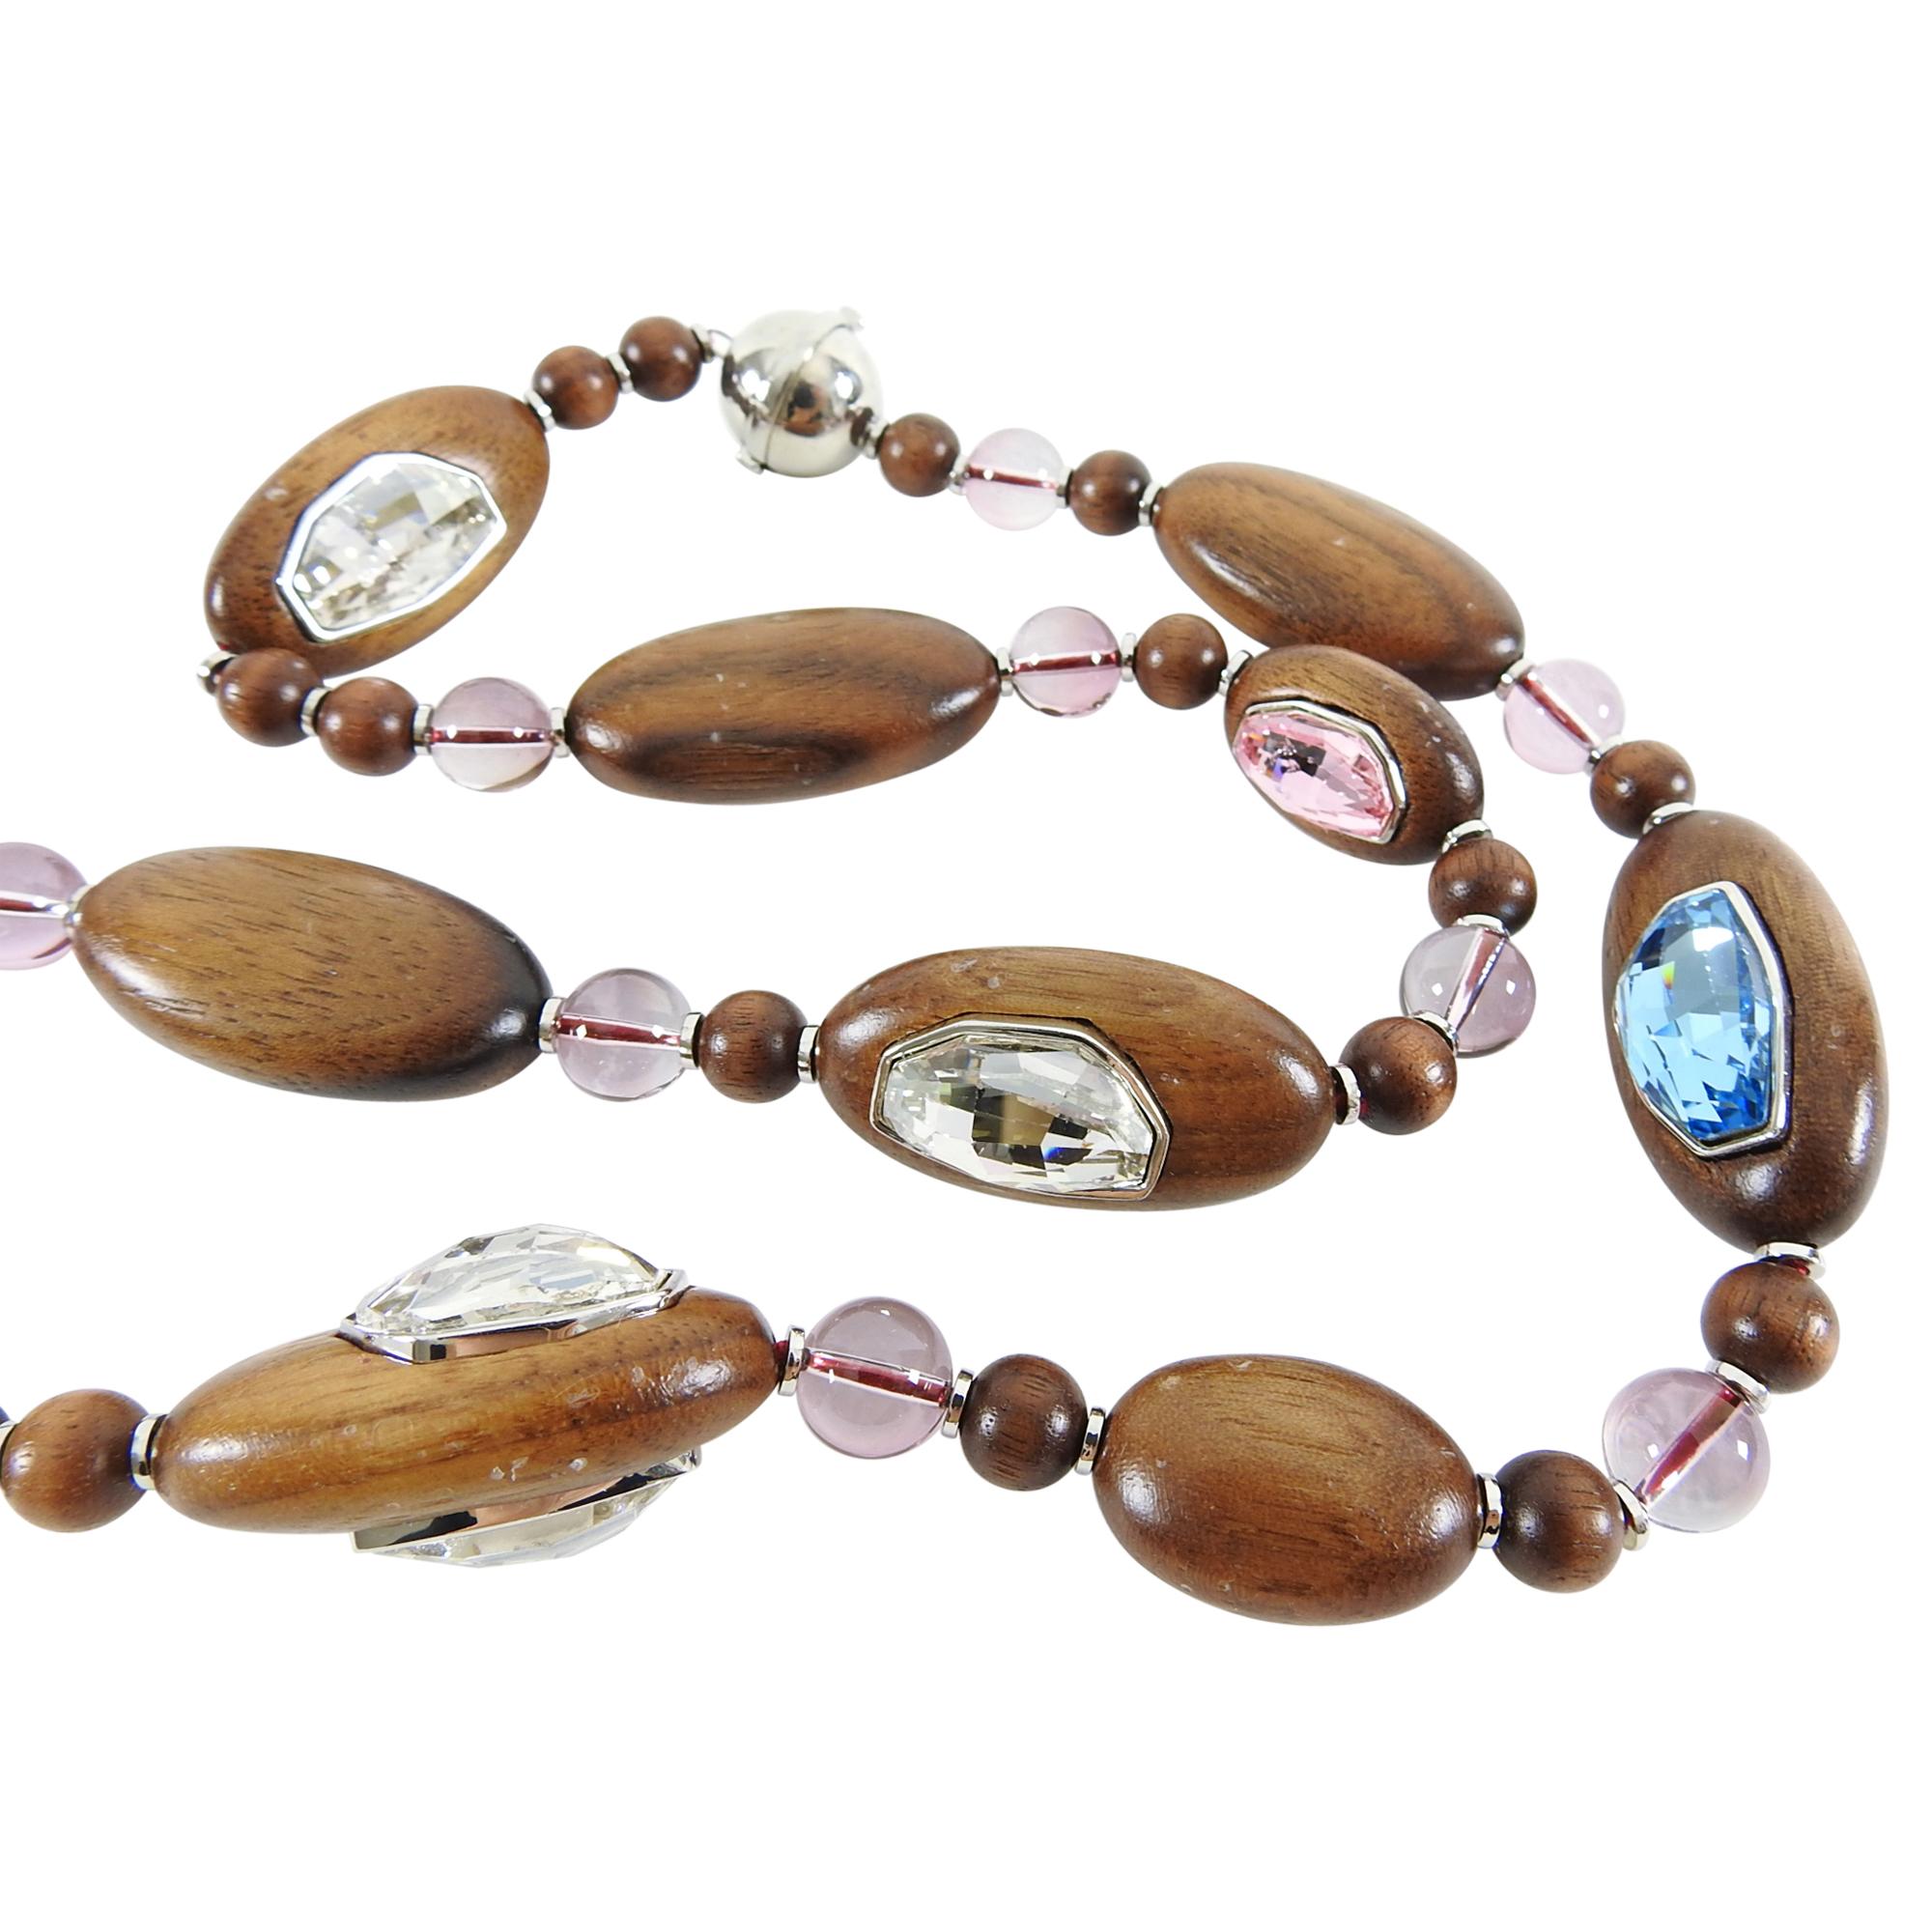 Atelier Swarovski x Fiona Kotur Walnut Wood Crystal Bead Necklace In Excellent Condition For Sale In Toronto, ON